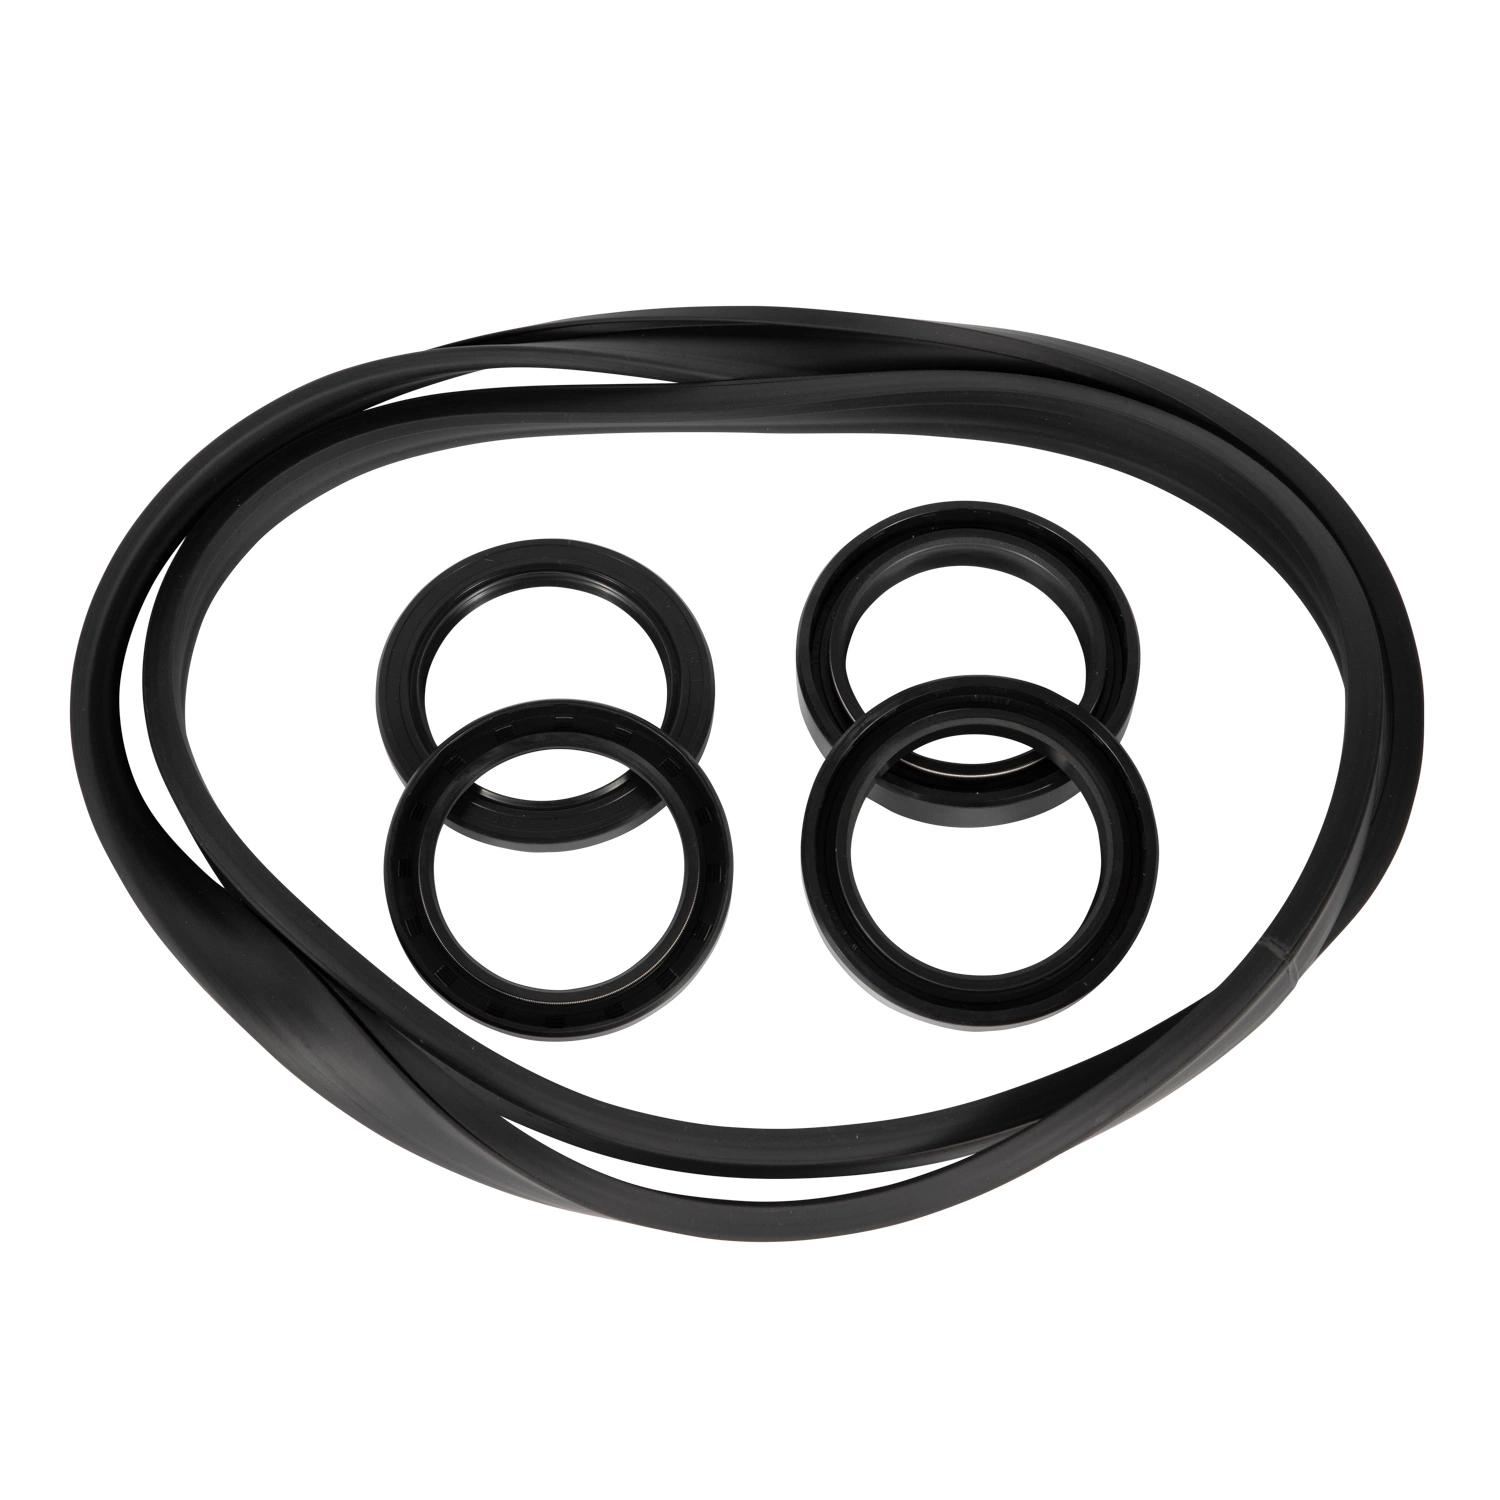 SGS / ISO Certified Rubber Sealing Gaskets O Rings for Auto Parts